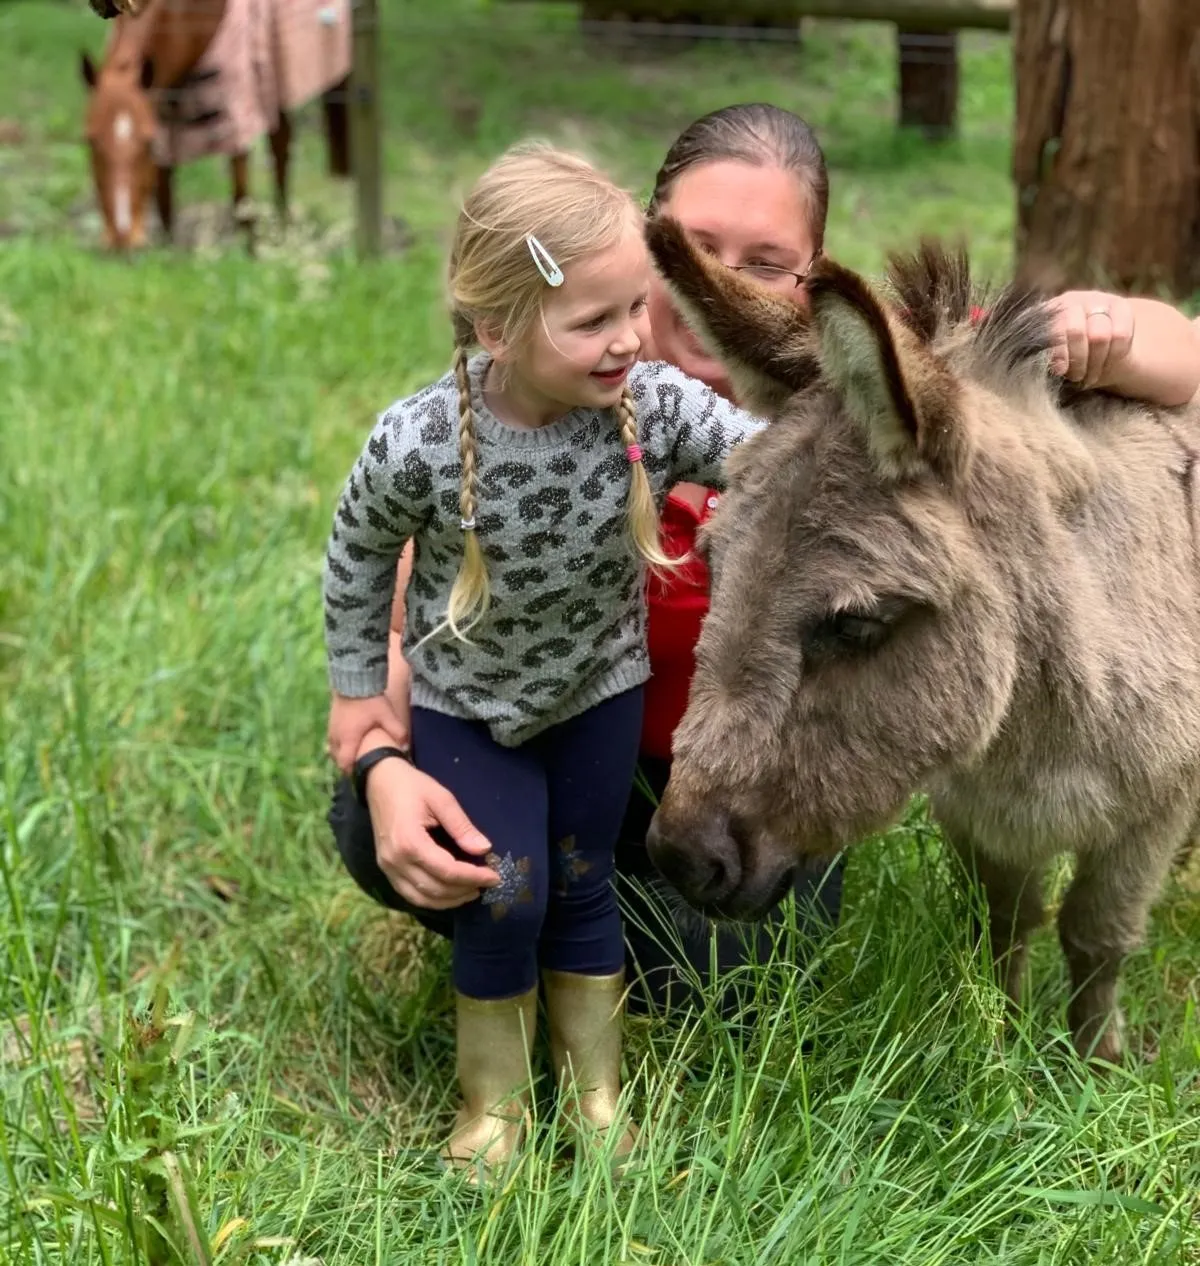 Little girl patting a miniature donkey. The mum is down low behind patting the donkey